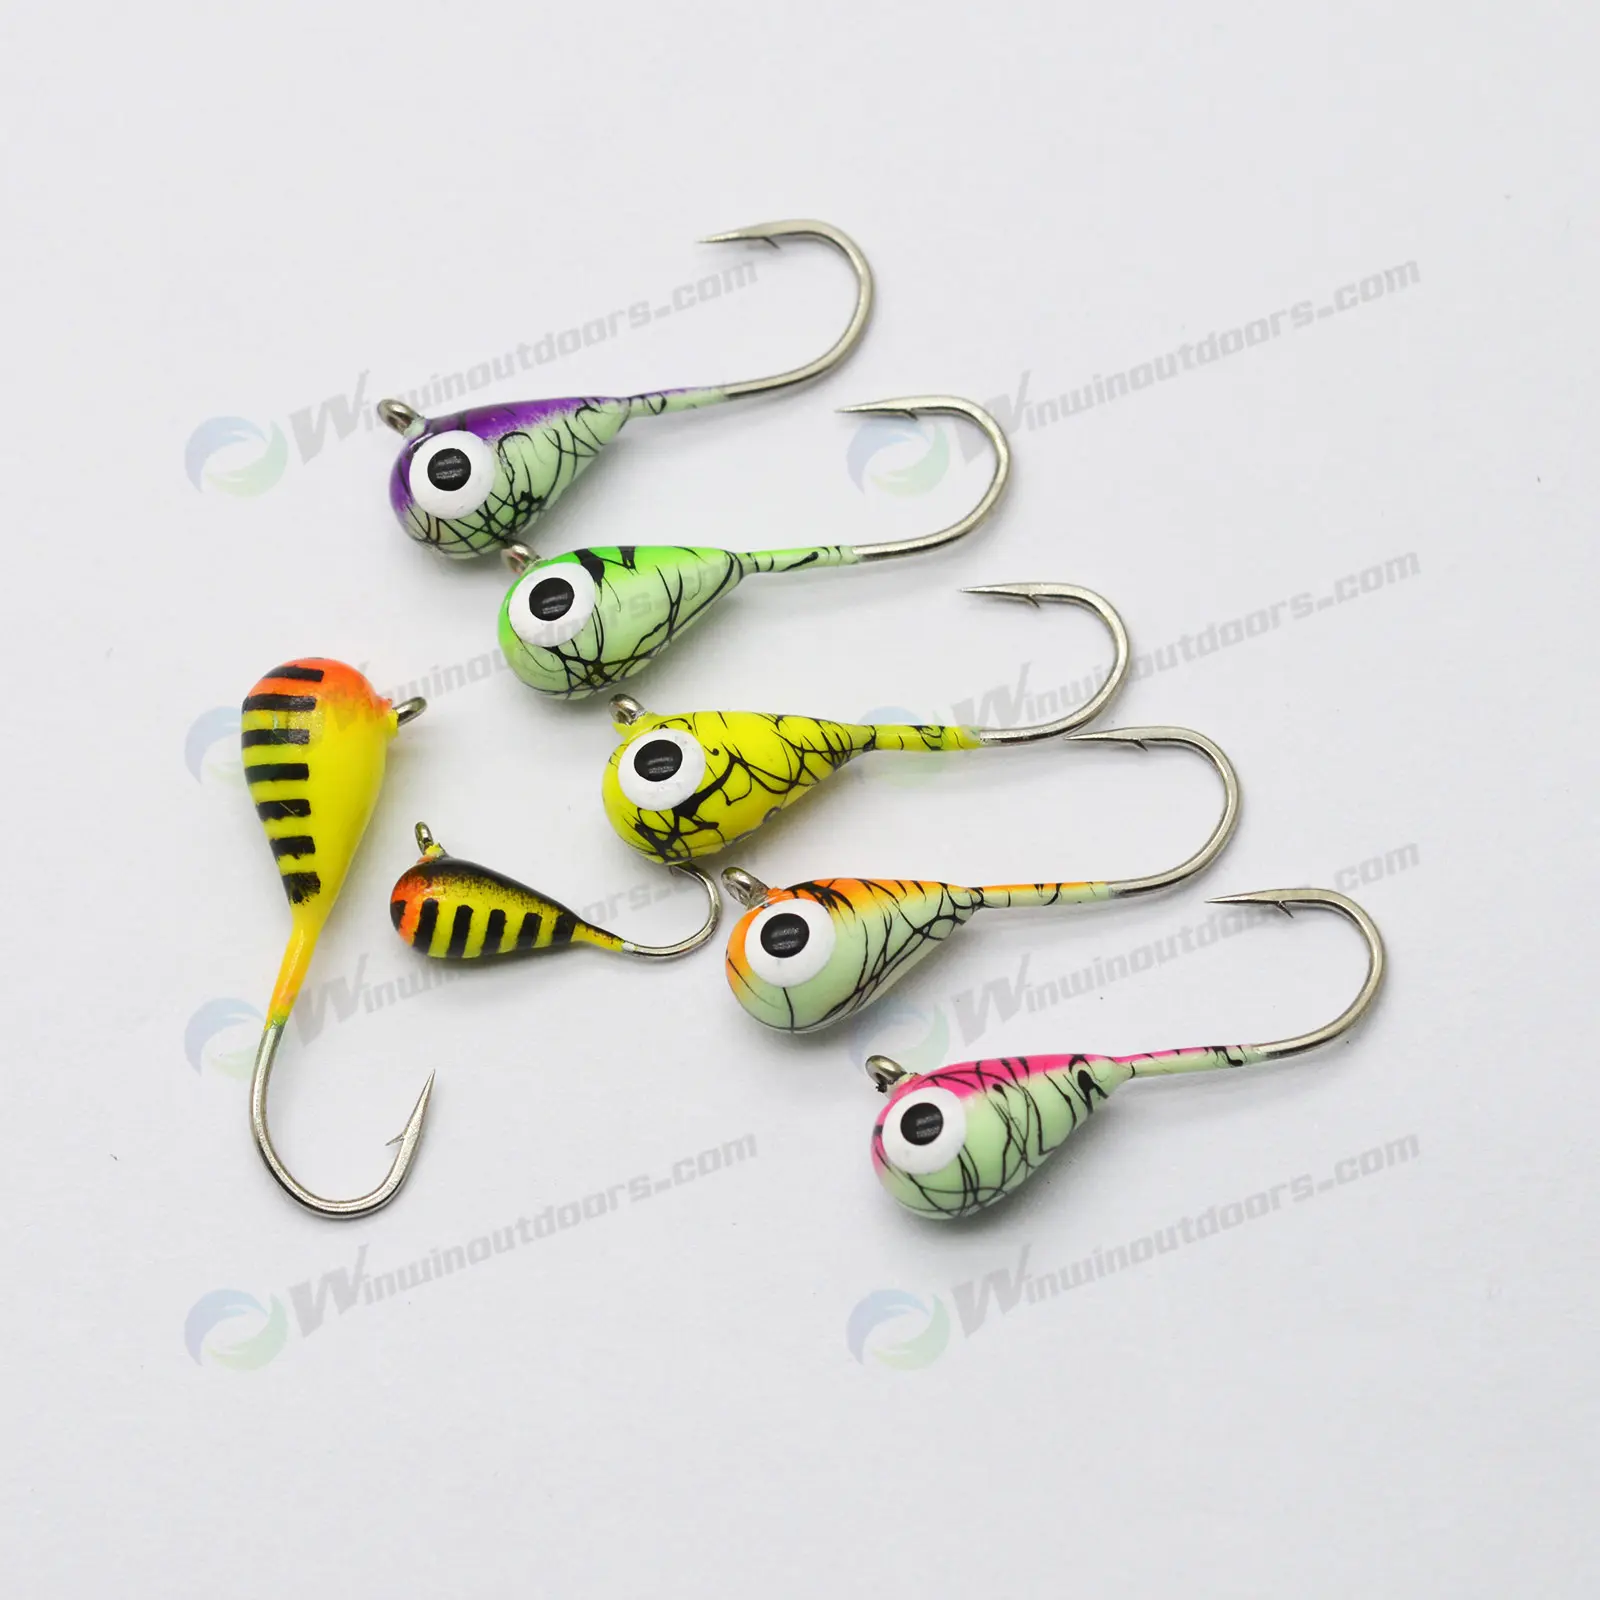 wholesale tungsten ice jig , tungsten ice fishing jig head high quality in stock